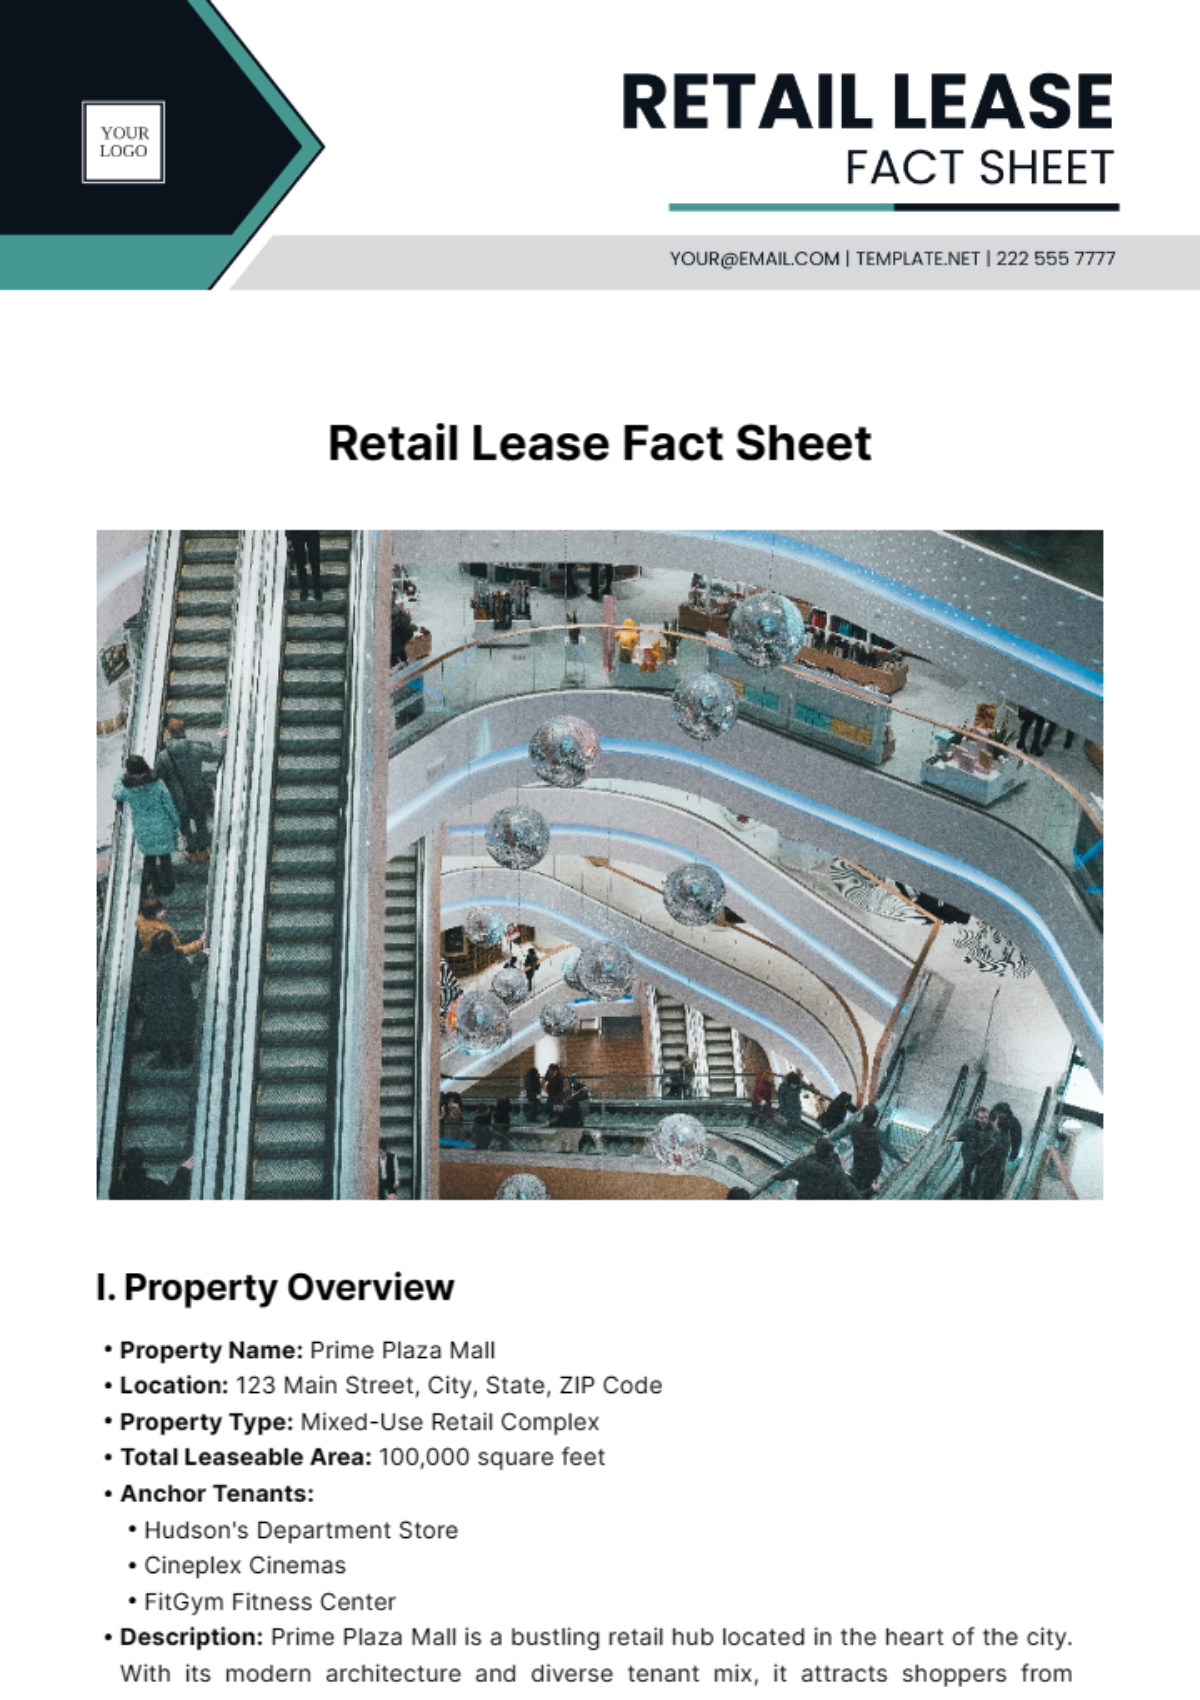 Retail Lease Fact Sheet Template